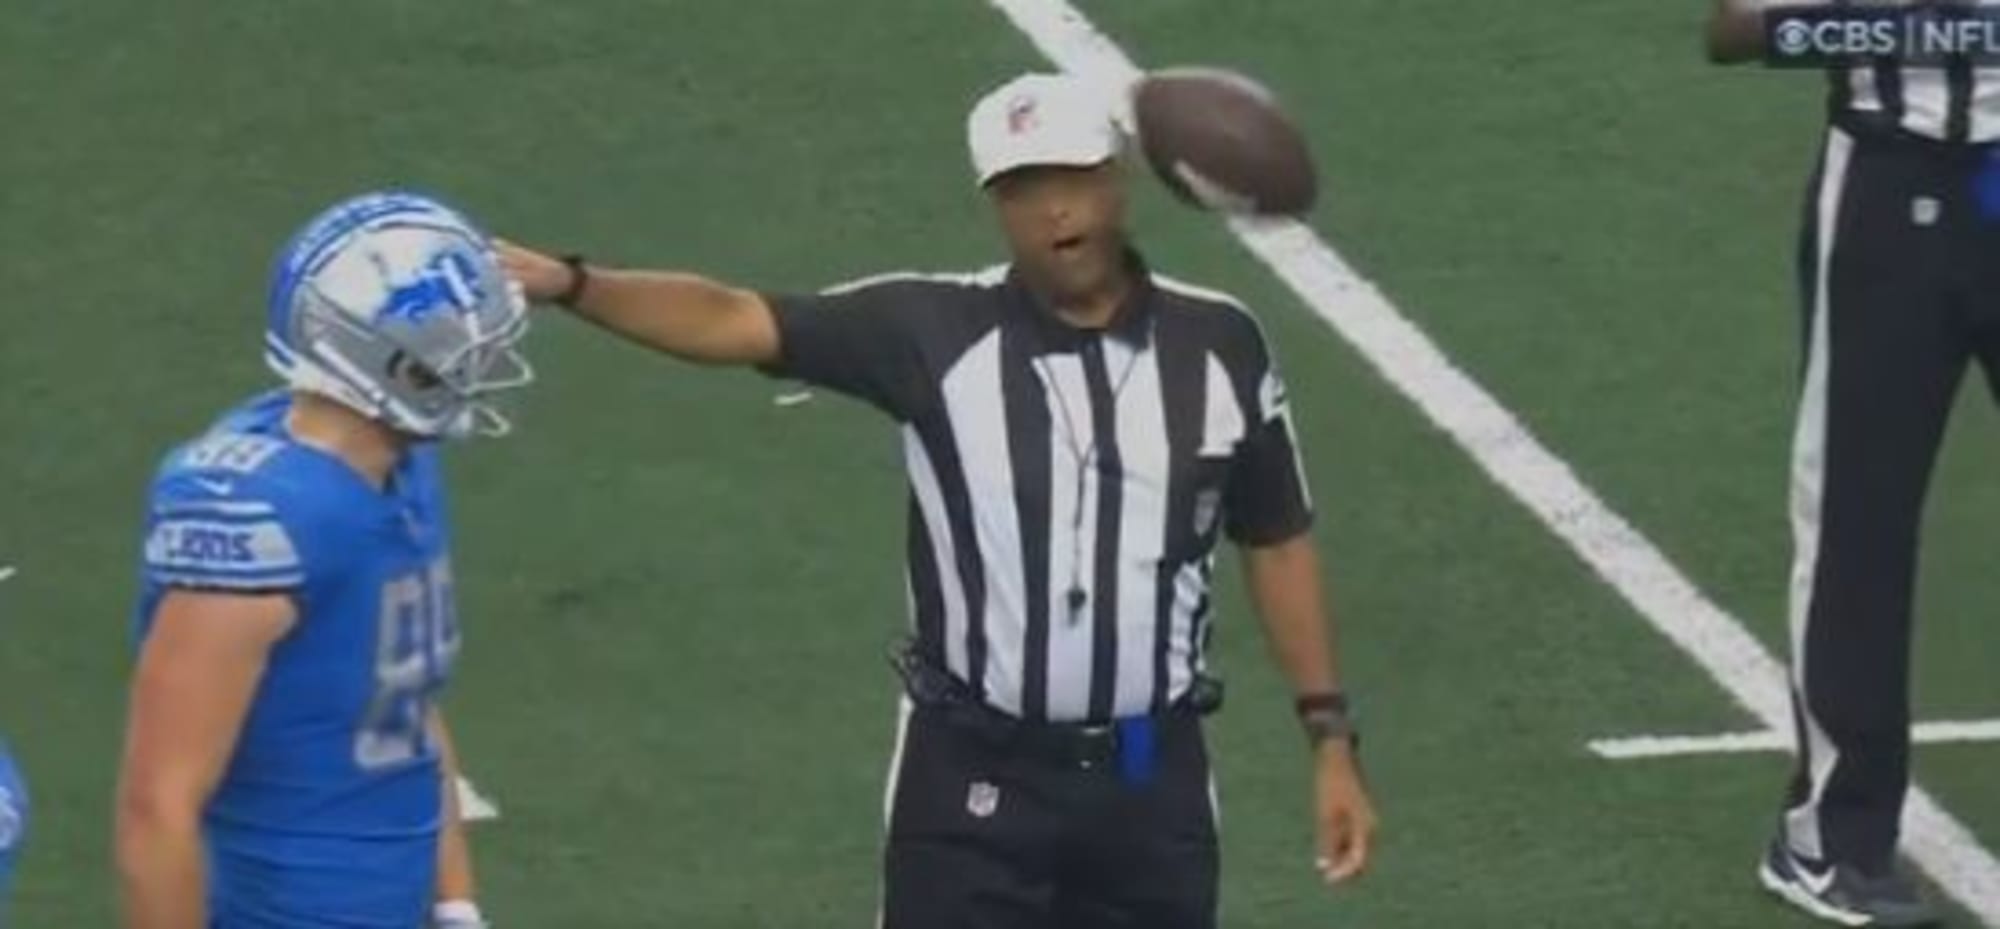 NFL ref gets hit in the head while announcing penalty